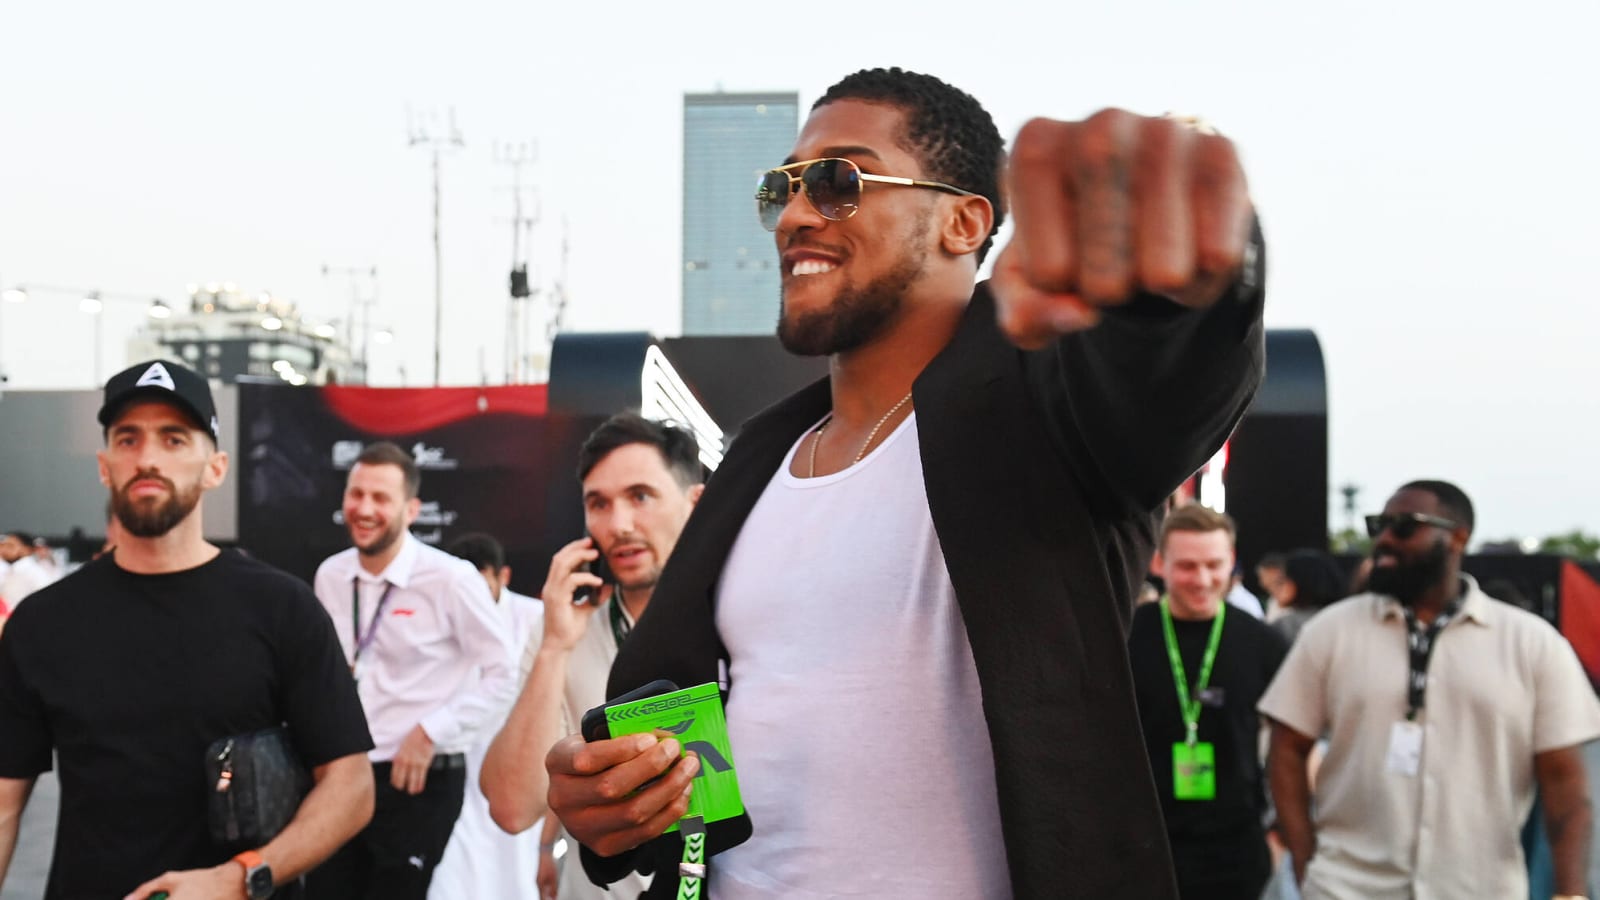 Possible Opponents for Anthony Joshua After Devastating KO Victory Against Francis Ngannou